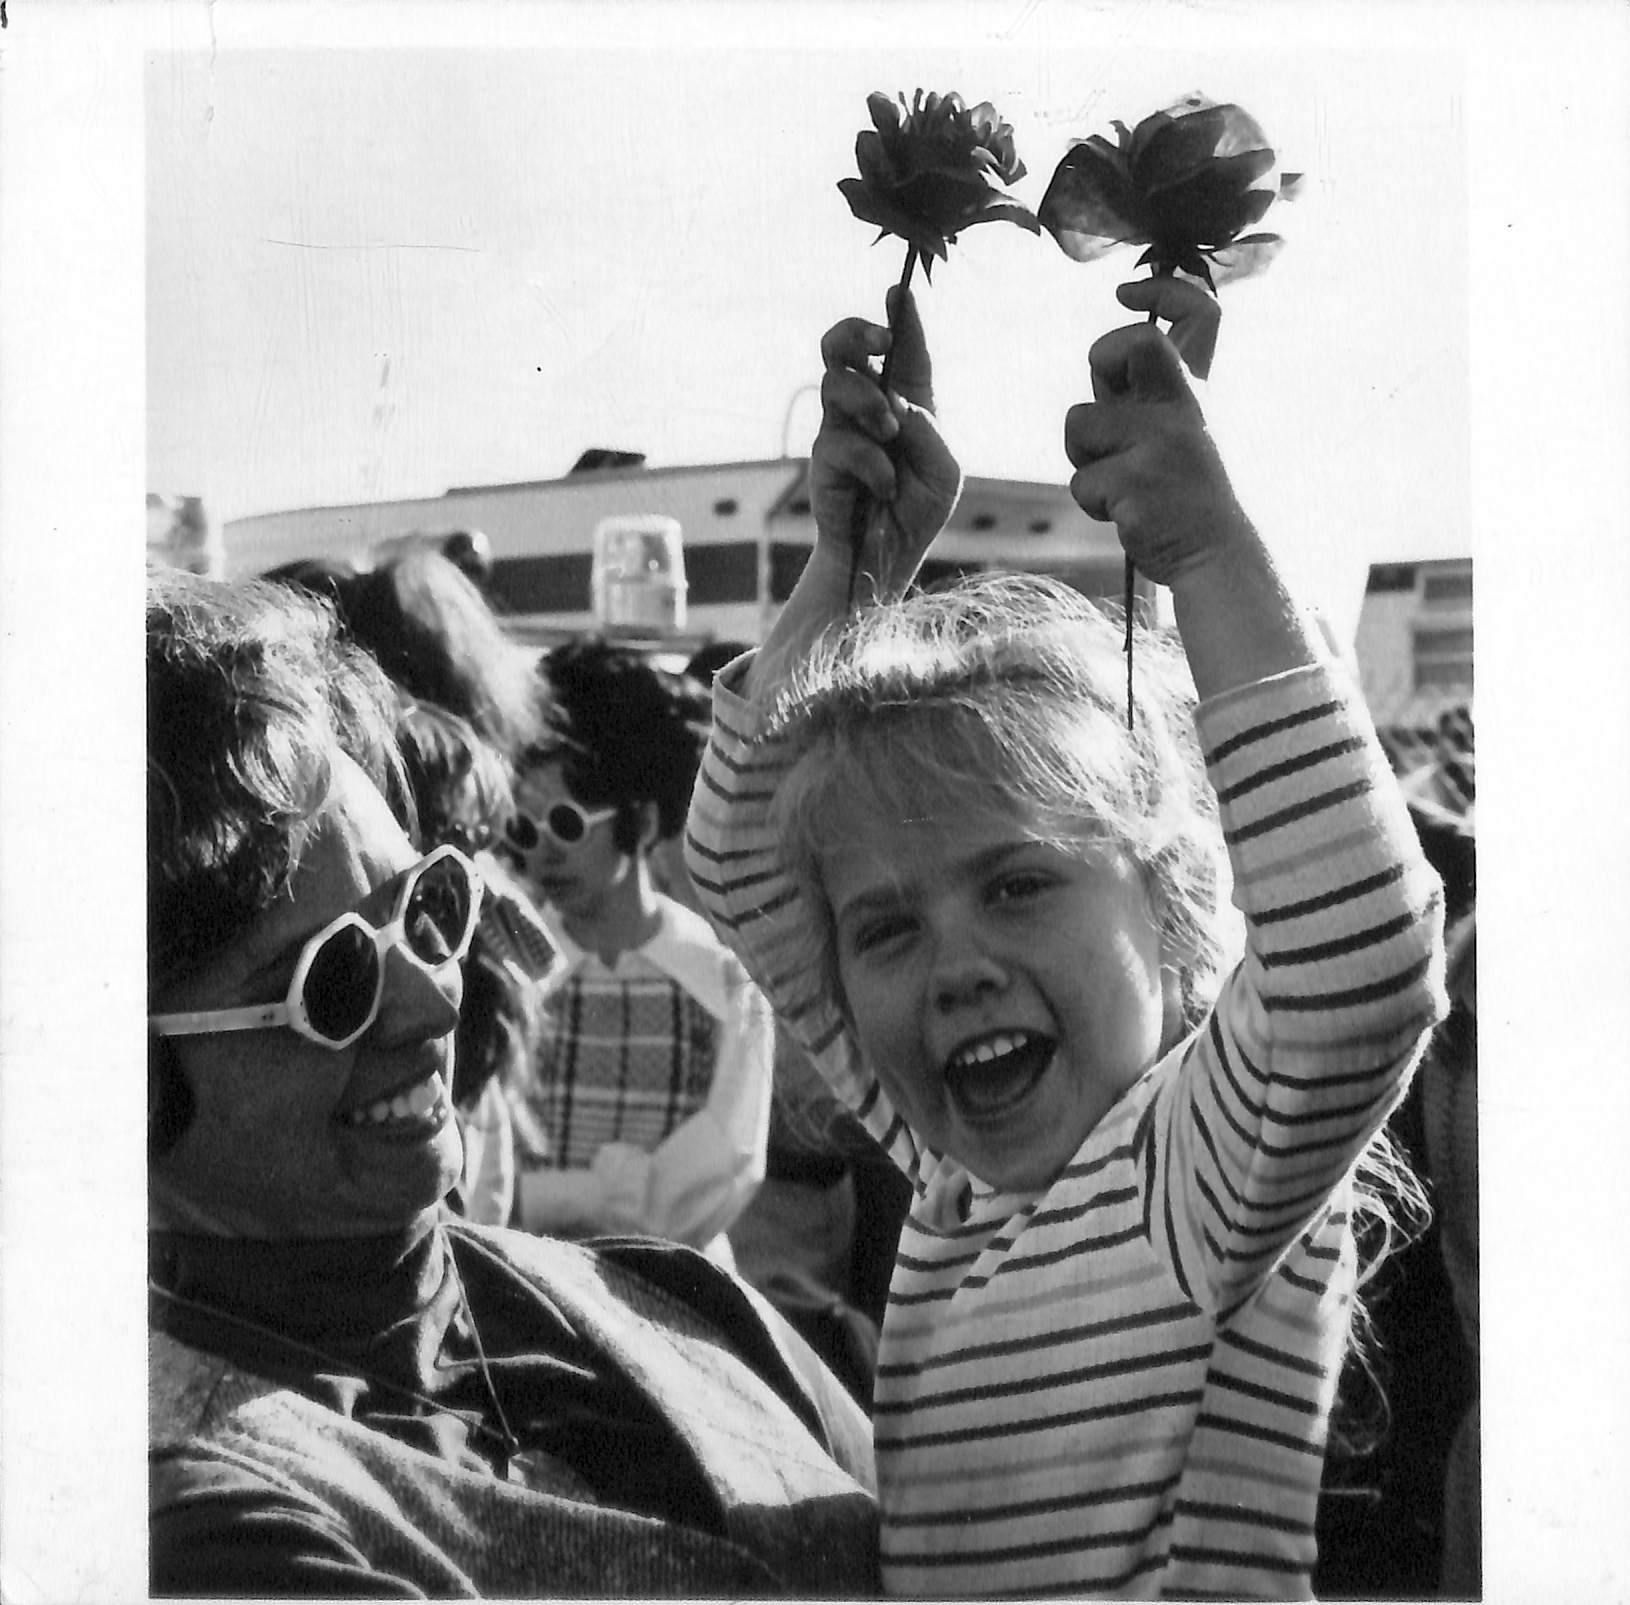 Unidentified Girl at a Parade